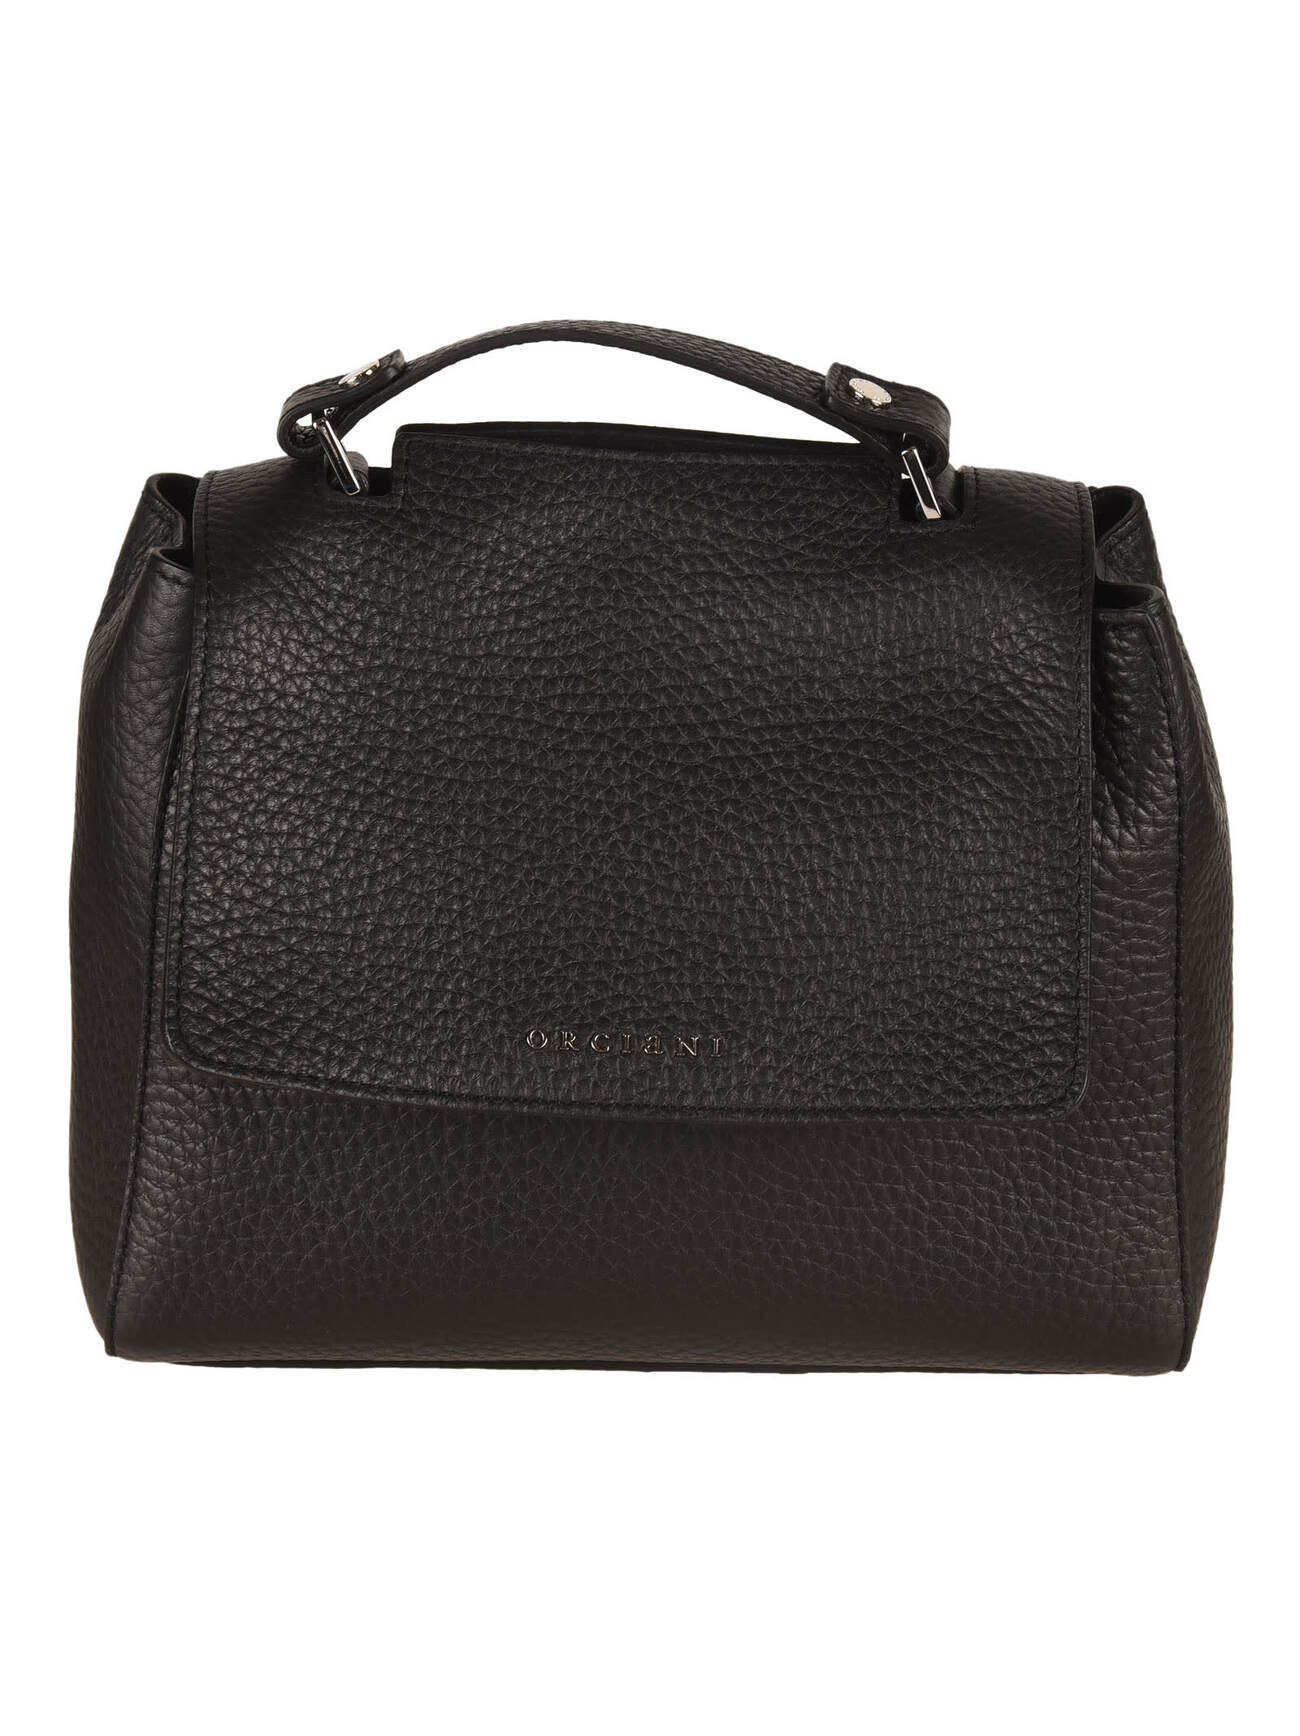 Orciani Croco Embossed Logo Flap Tote in black